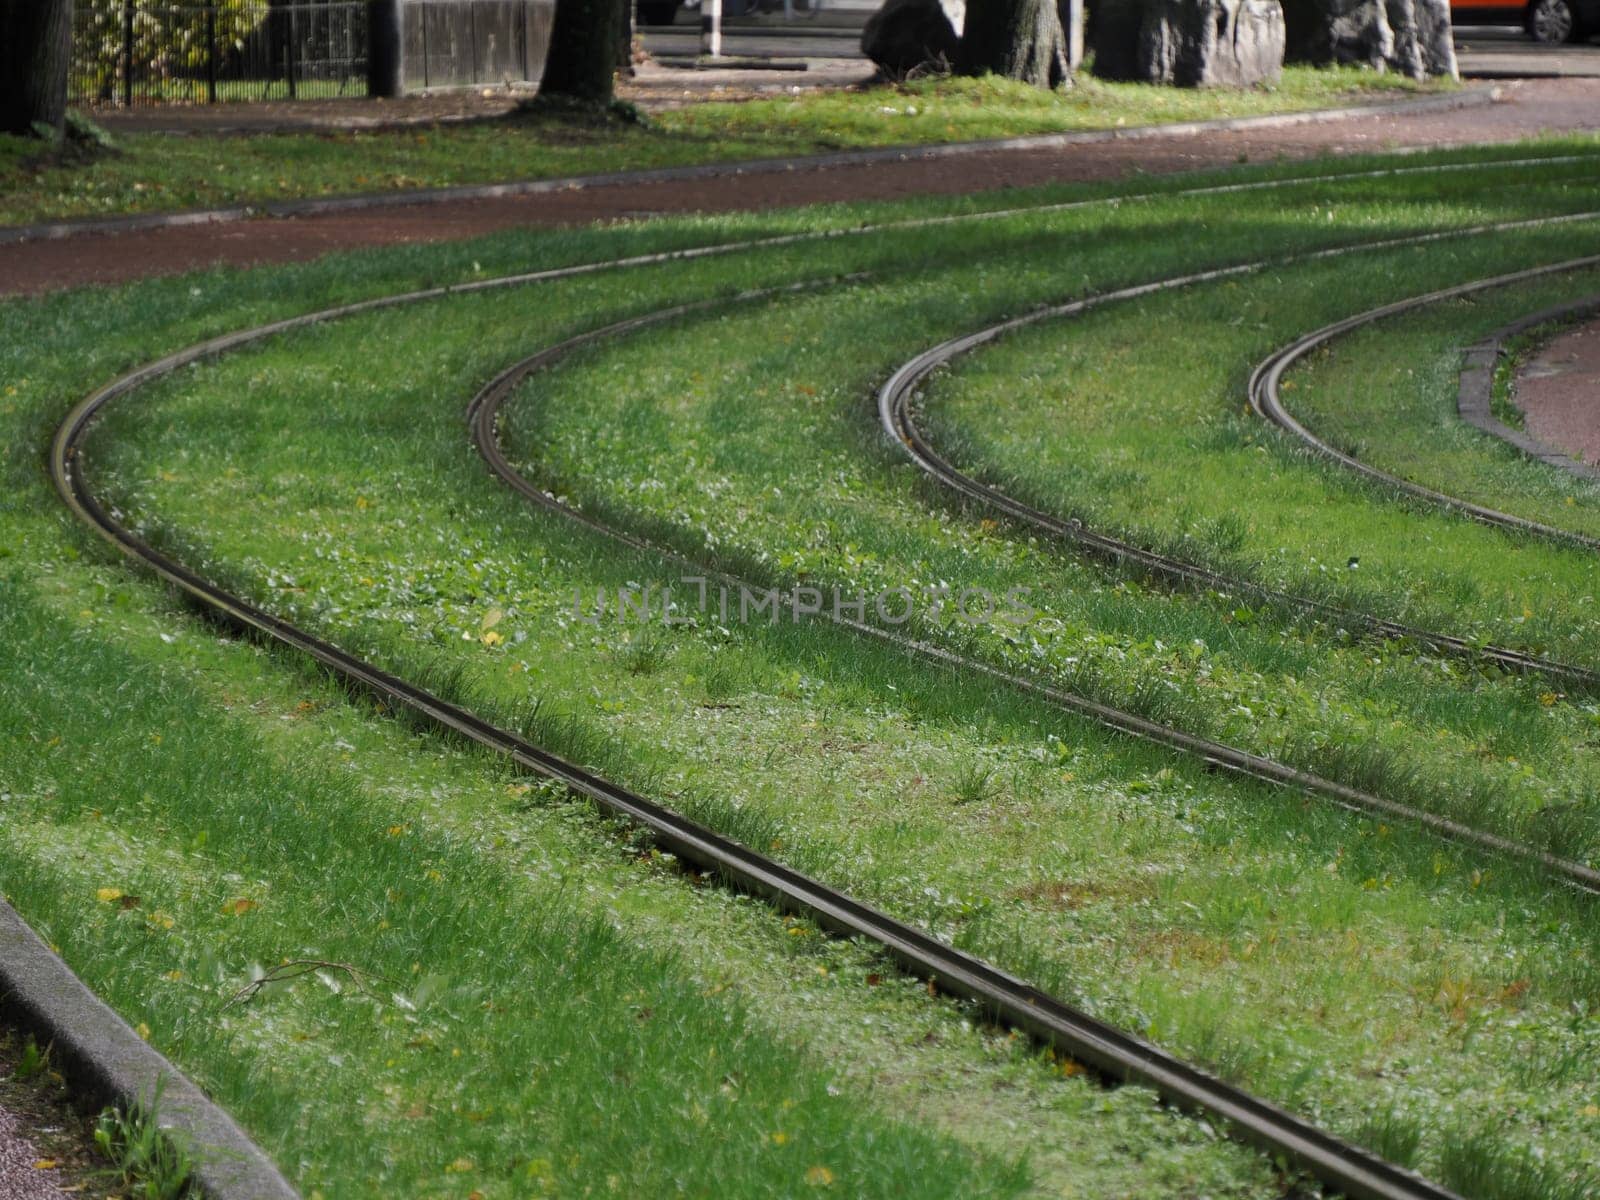 Amsterdam rail tracks in grass view on rainy day by AndreaIzzotti